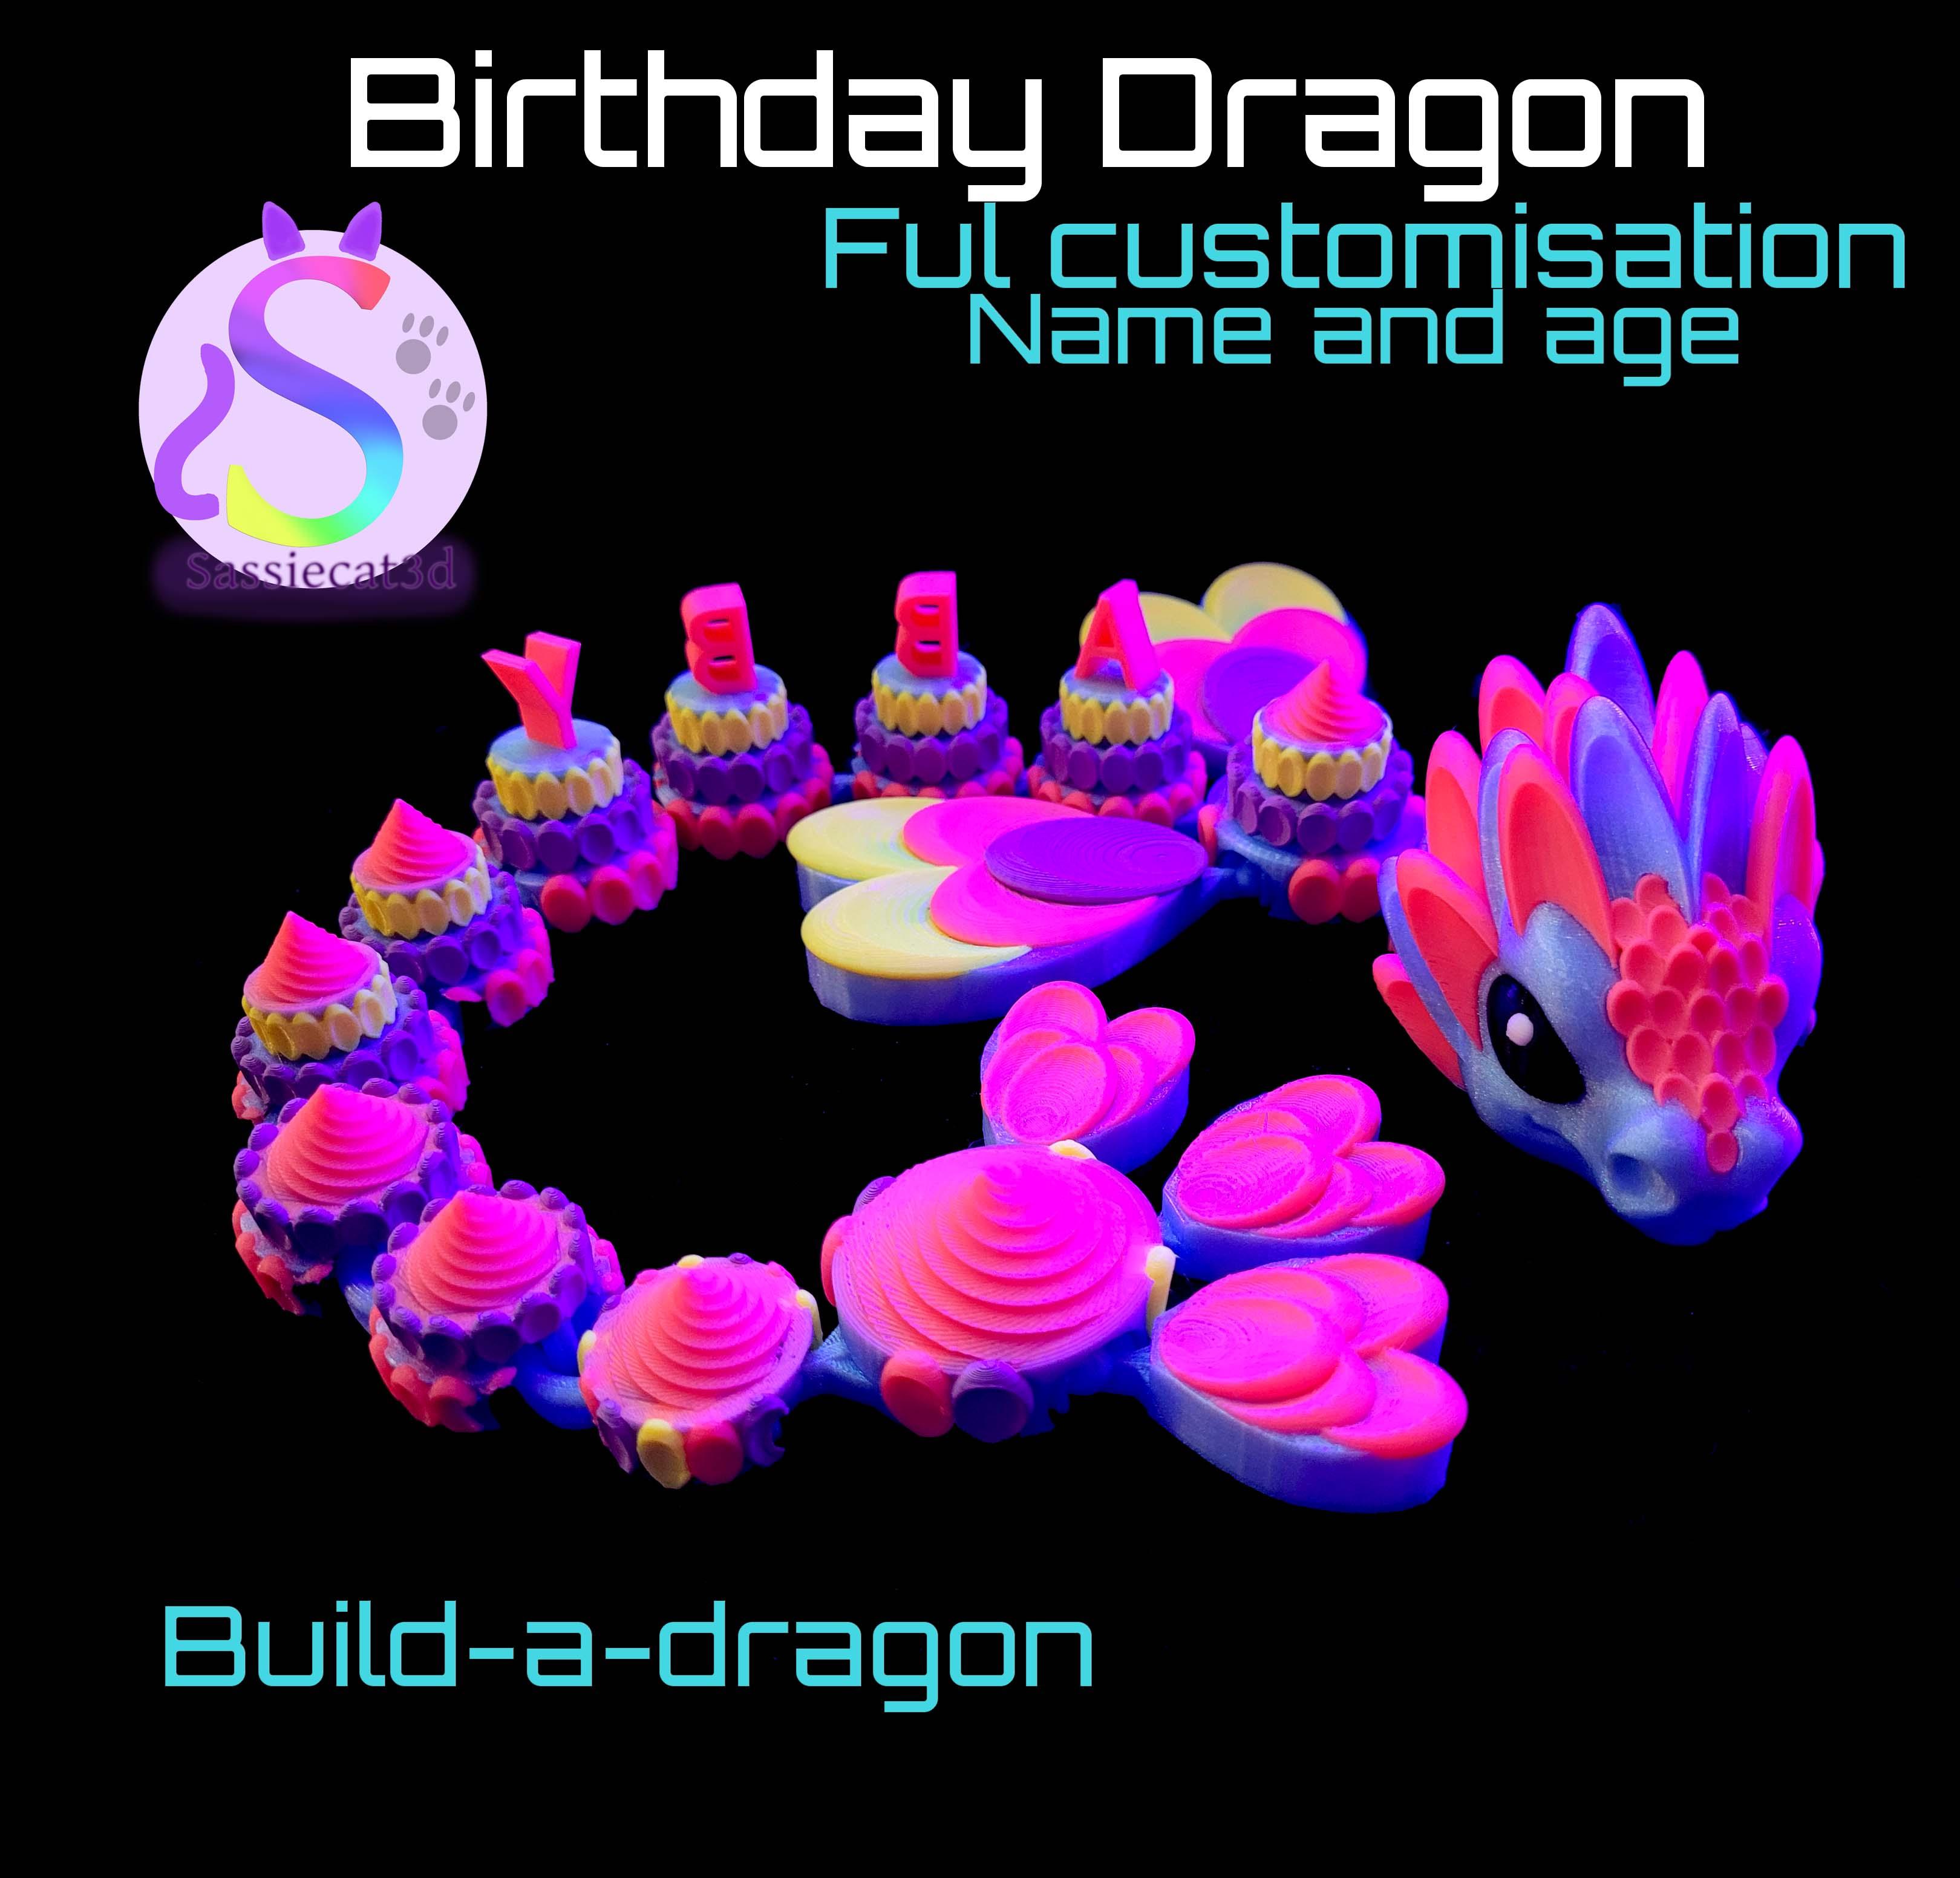 Birthday build a dragon, ful customisation *Commercial Version* 3d model